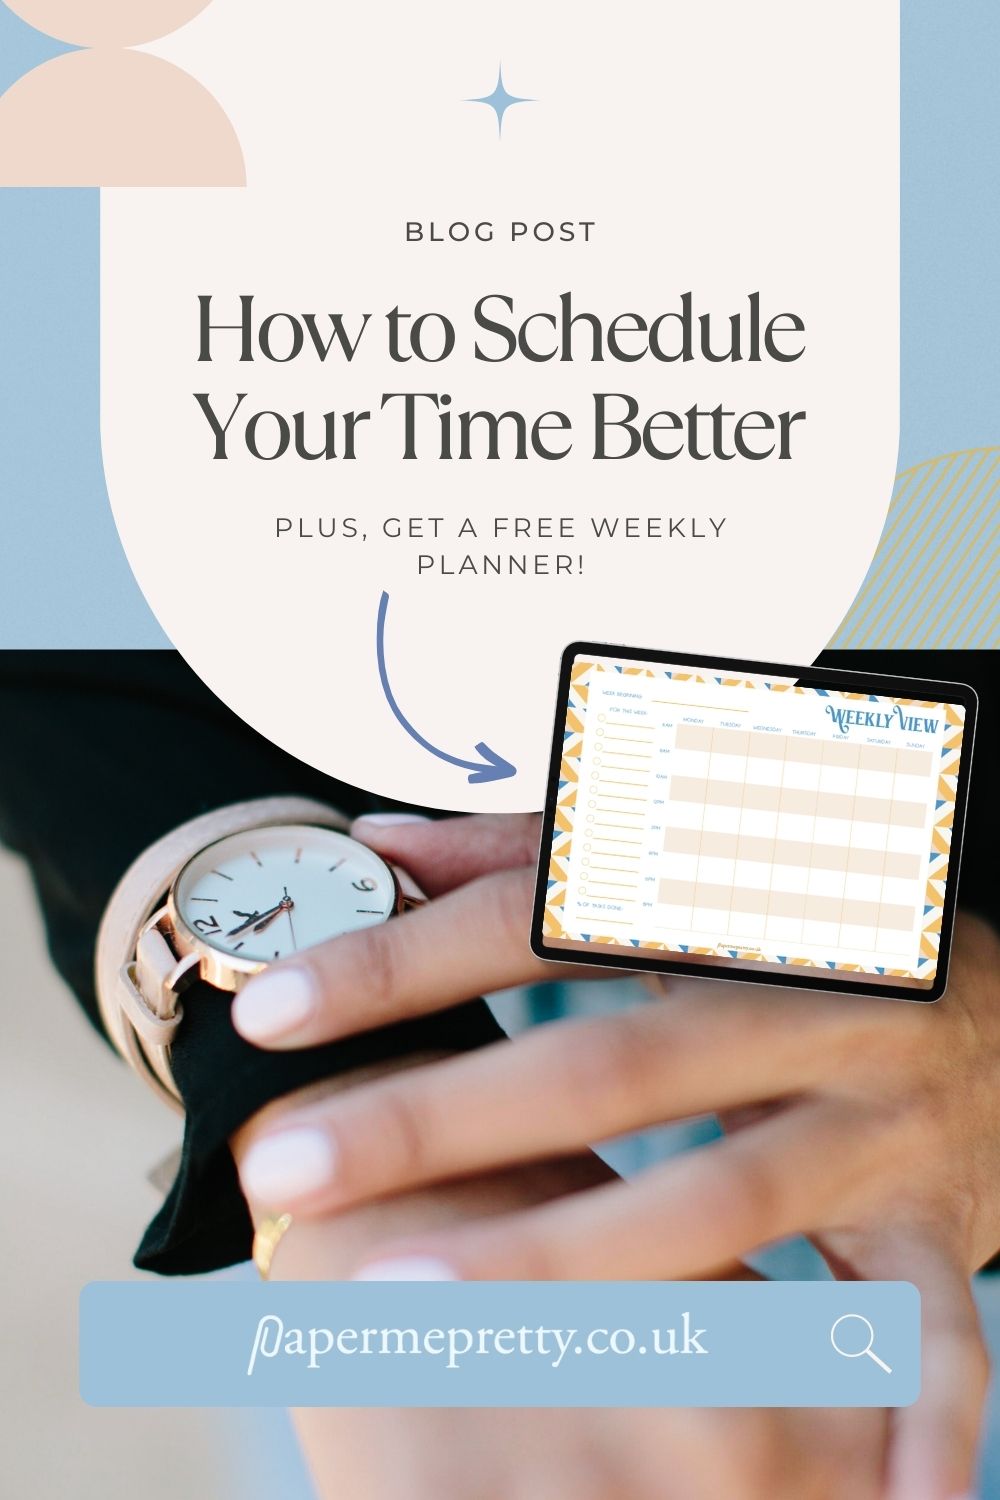 If you're struggling to 'get it all done', use my method for rebuilding a schedule that works for you. I know what it means to be SUPER busy! And I give you my top tips right here. PLUS, get my Weekly Planner FREE inside this post! #productivity #timemanagement #momlife #gtd #goals